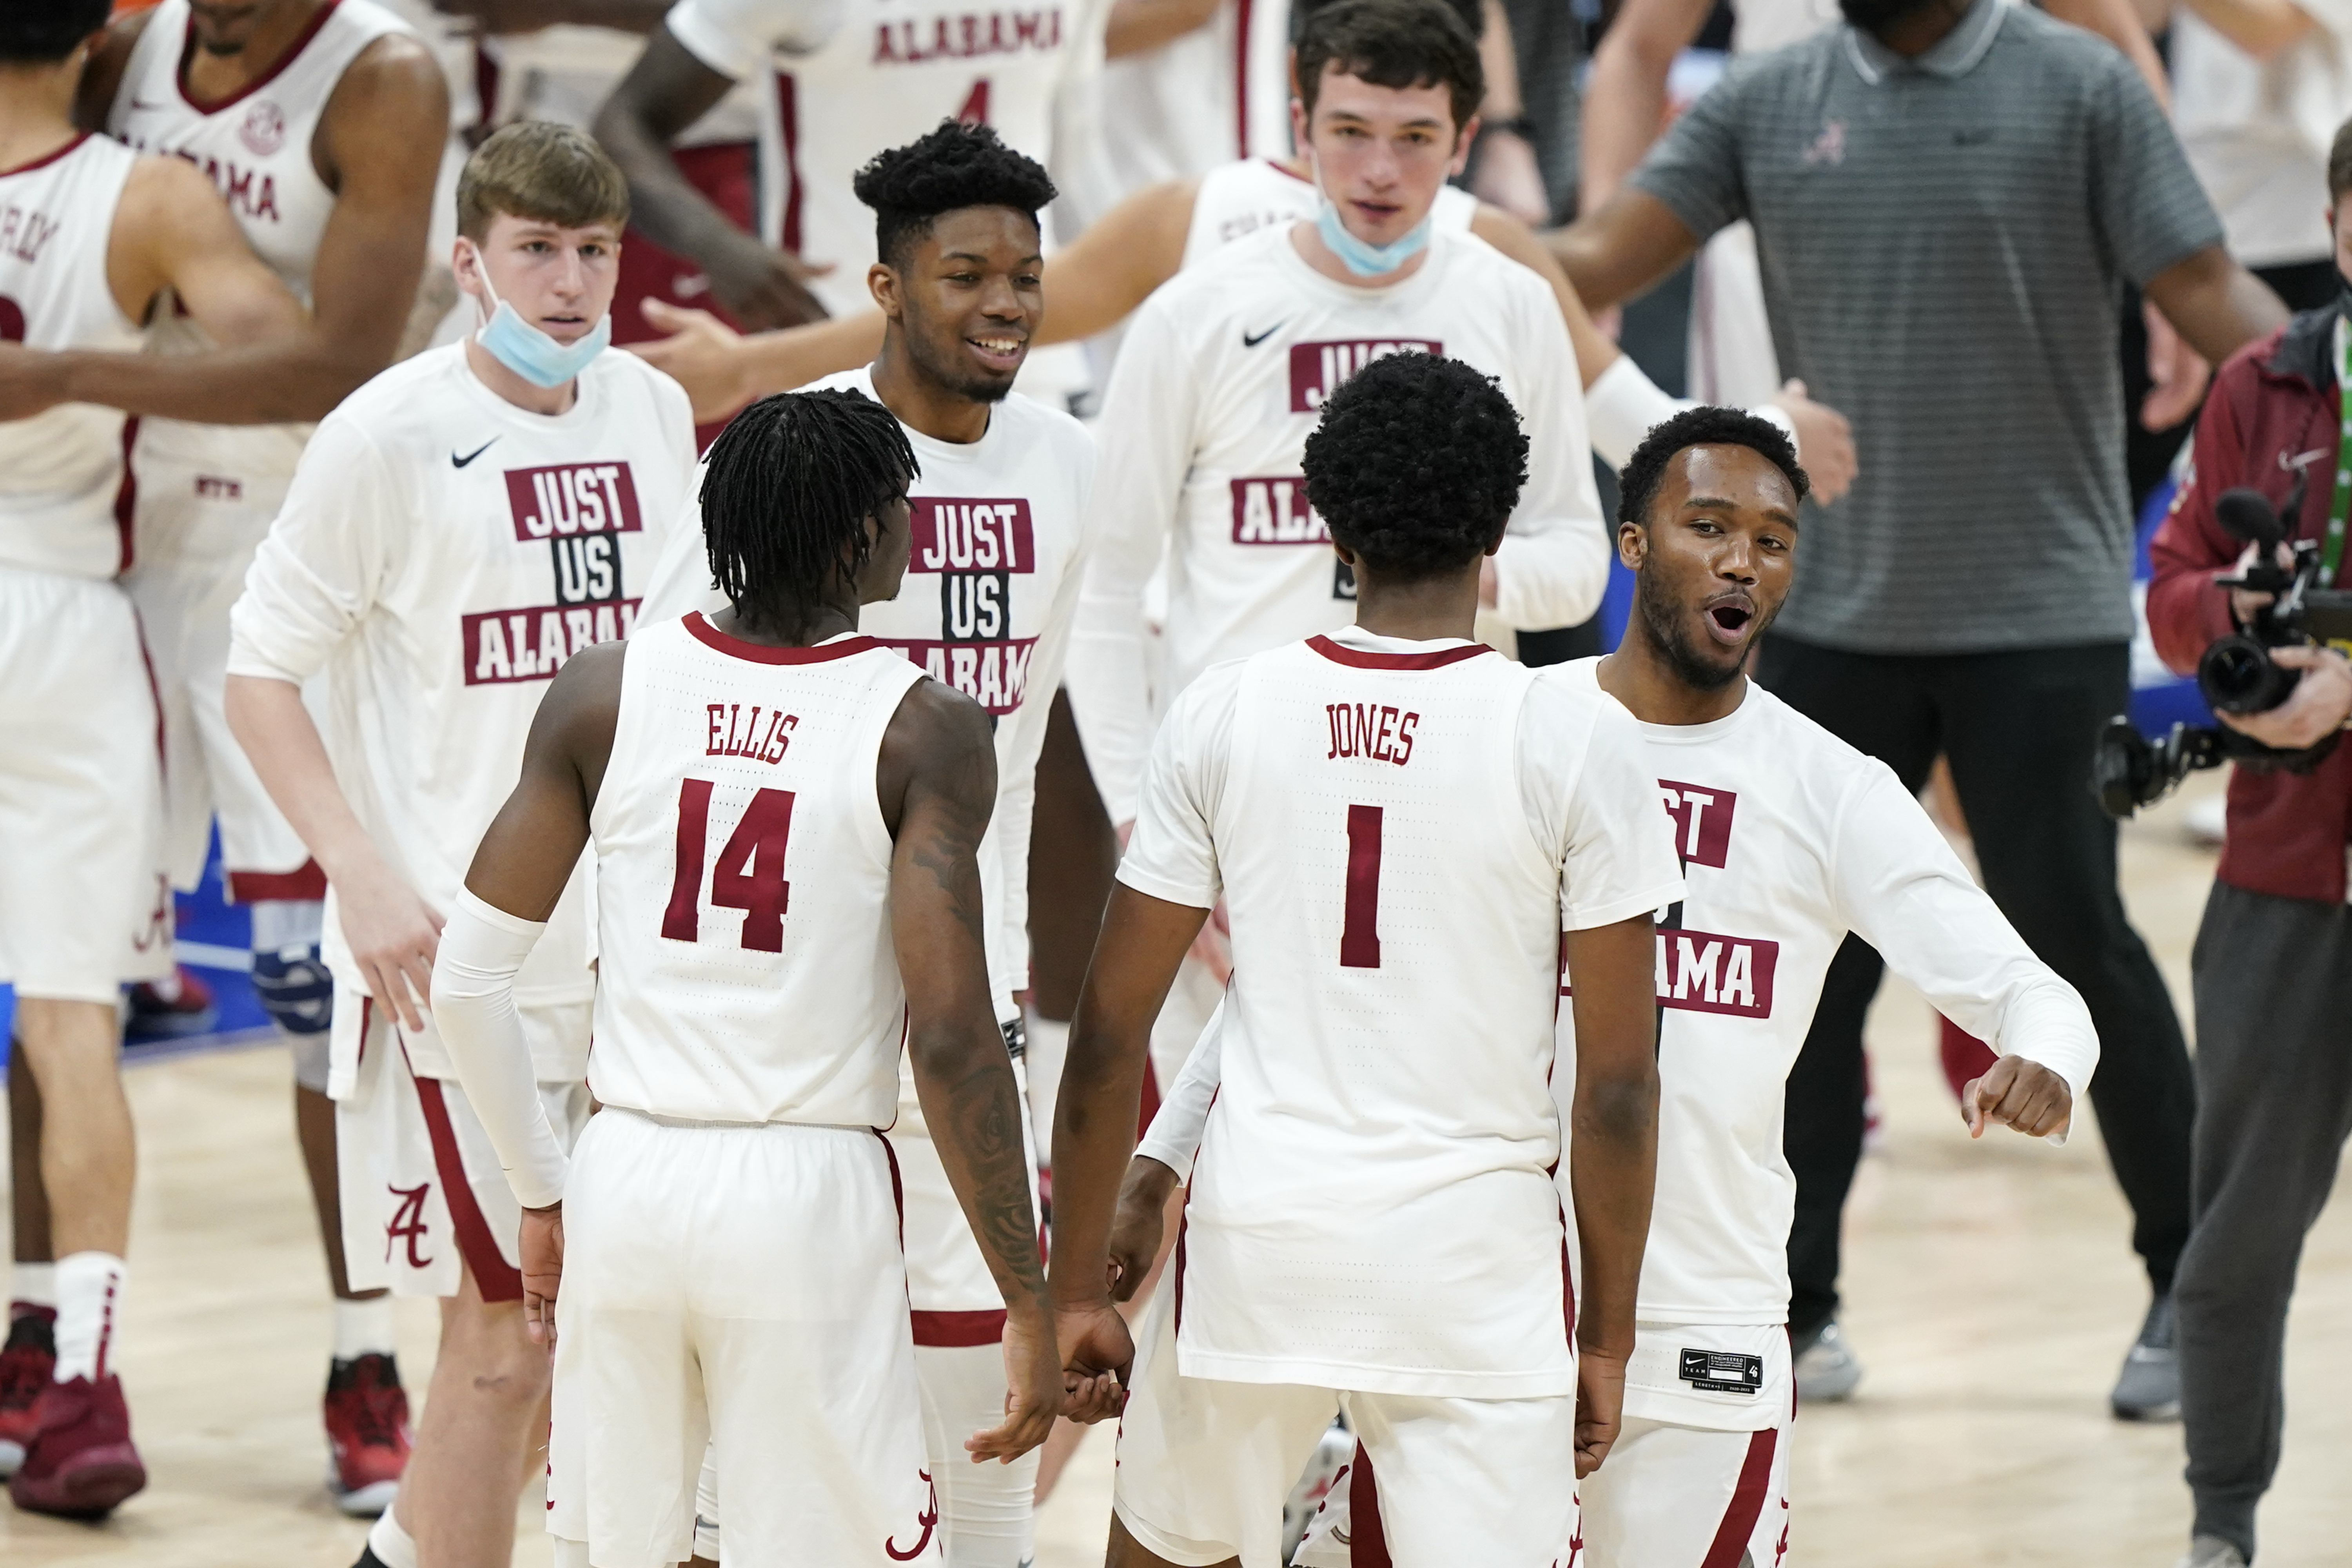 Alabama-LSU live stream (3/14) How to watch SEC tournament championship online for free, TV, time